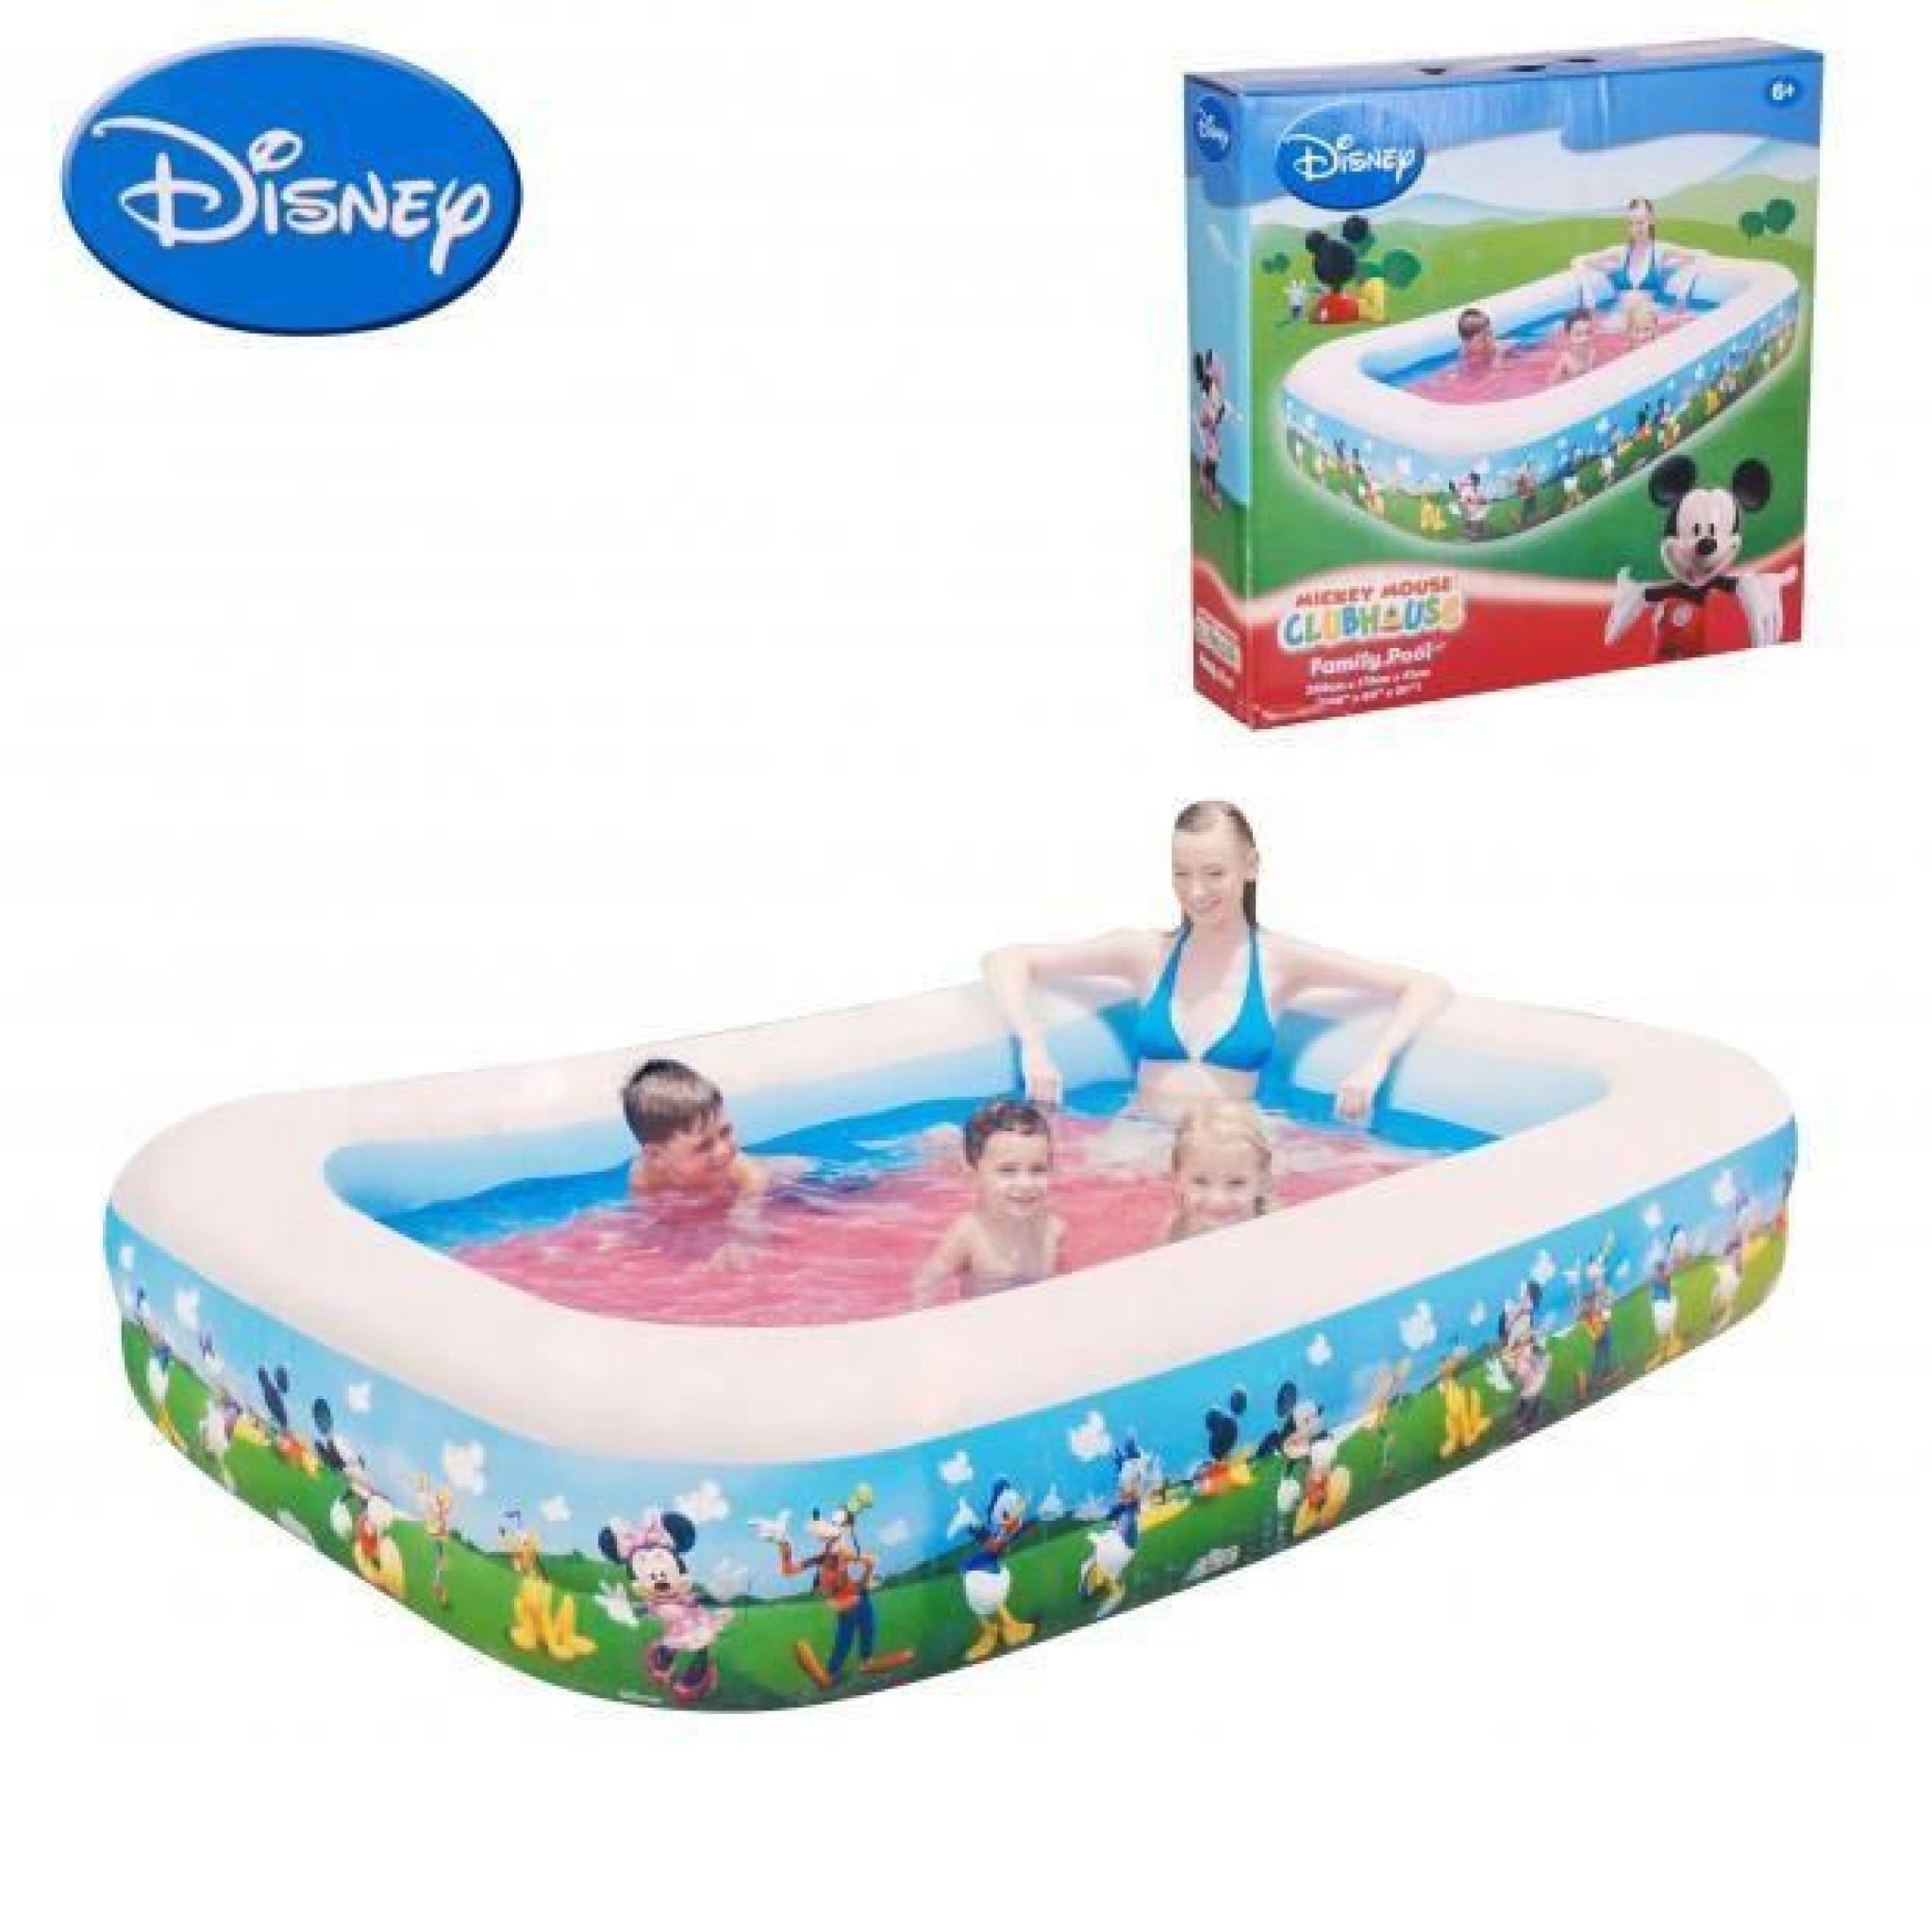 Piscine Gonflable Mickey Rectangle Enfant 269x175x51 - Multicolore - 158